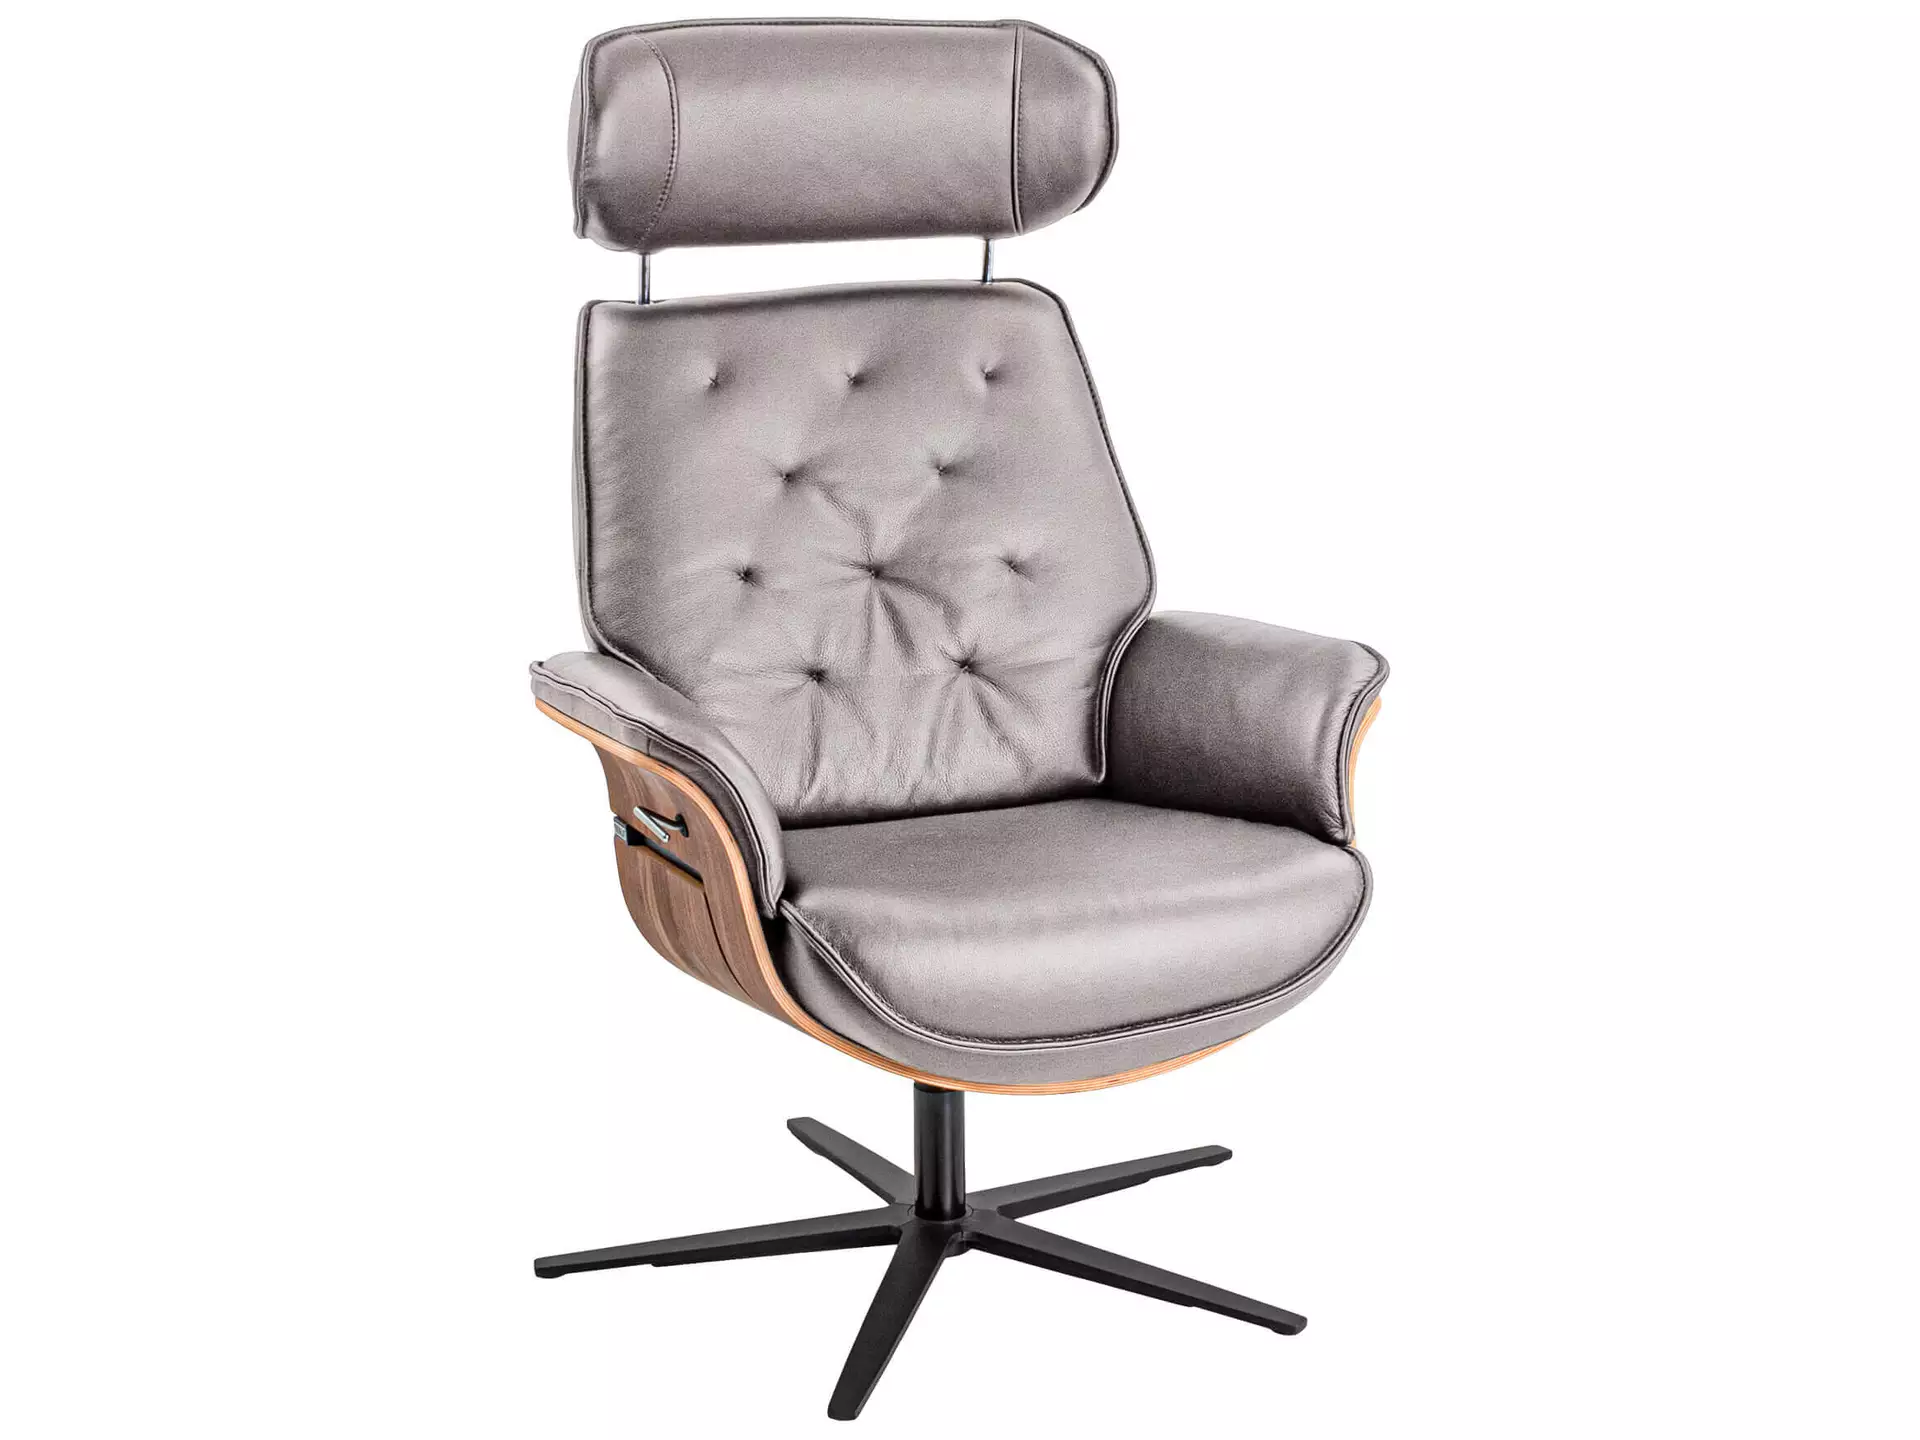 Relaxer Curacao Nussbaum Basic Polipol / Farbe: Silver / Material: Stoff Basic